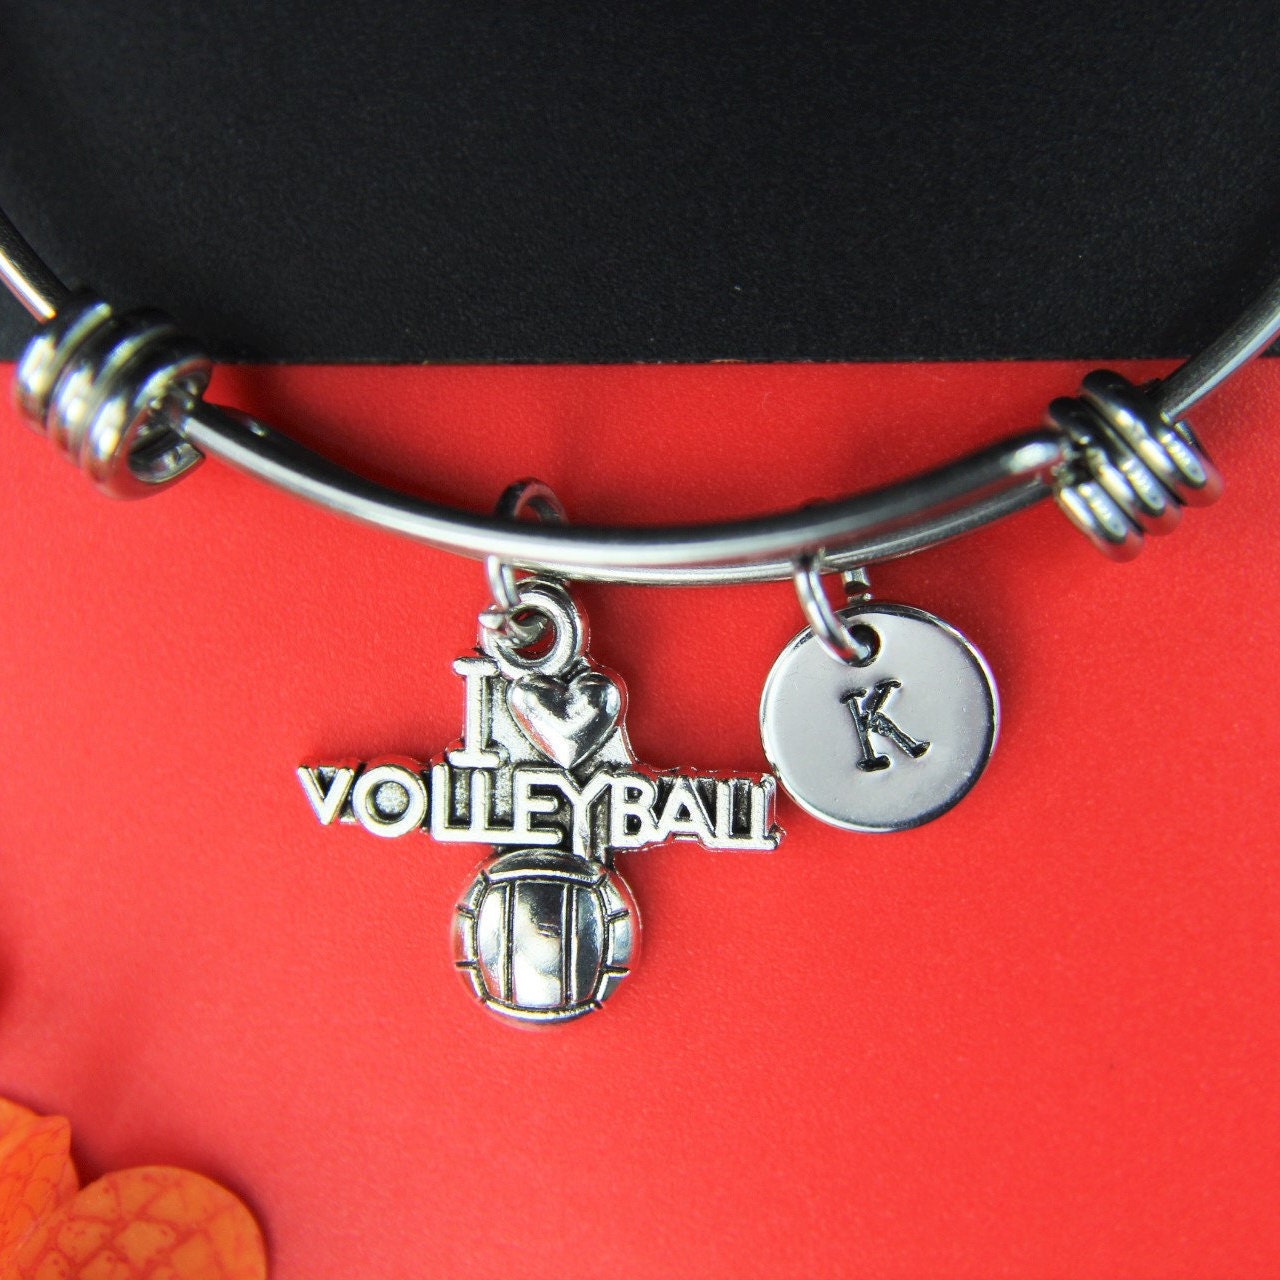 Volleyball Charm Bracelet - I Love Volleyball Small